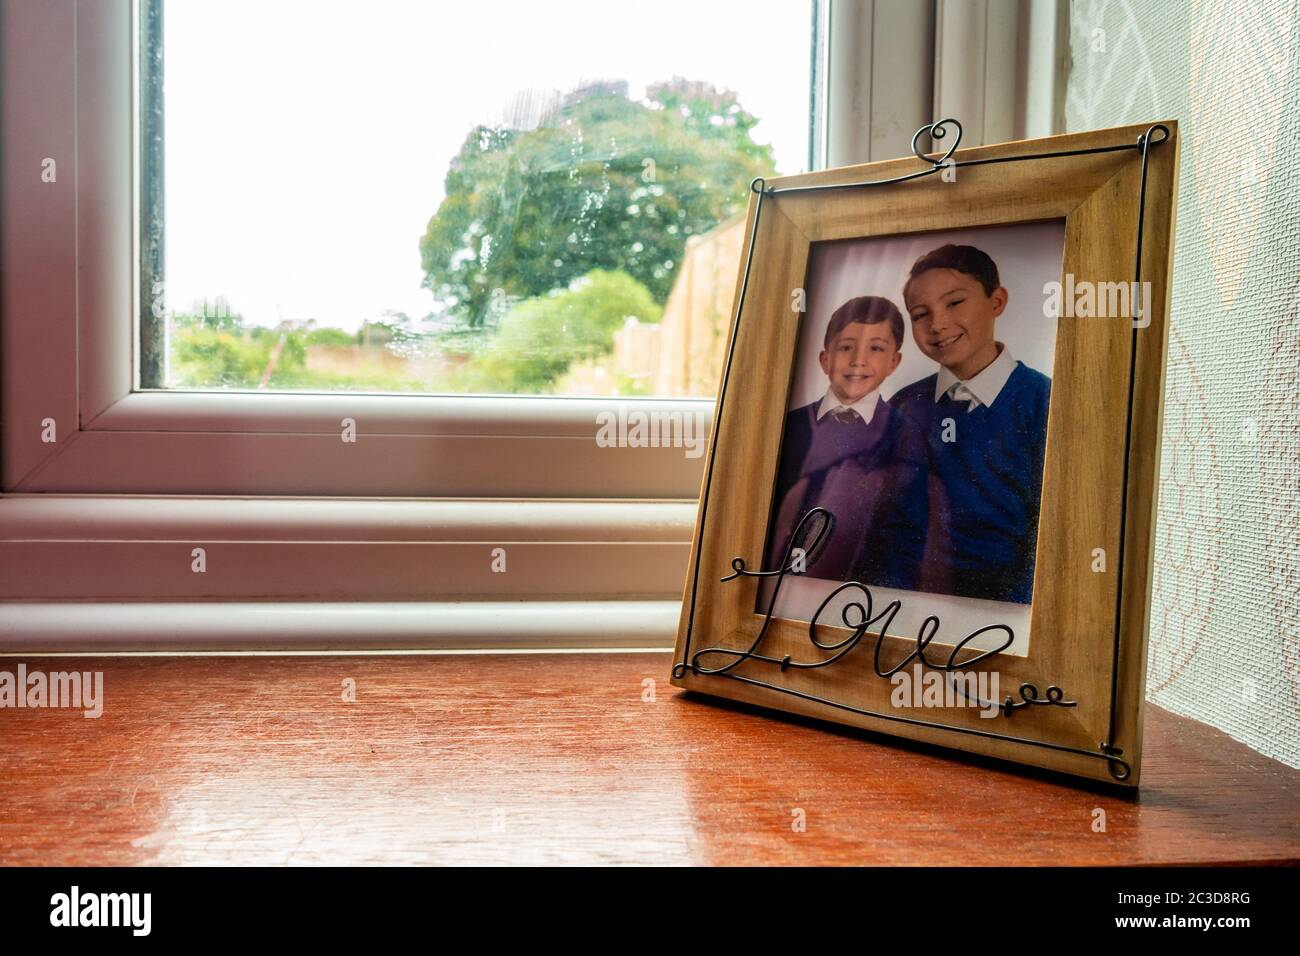 A school photo of young brothers in a picture frame on a widow sill. Stock Photo